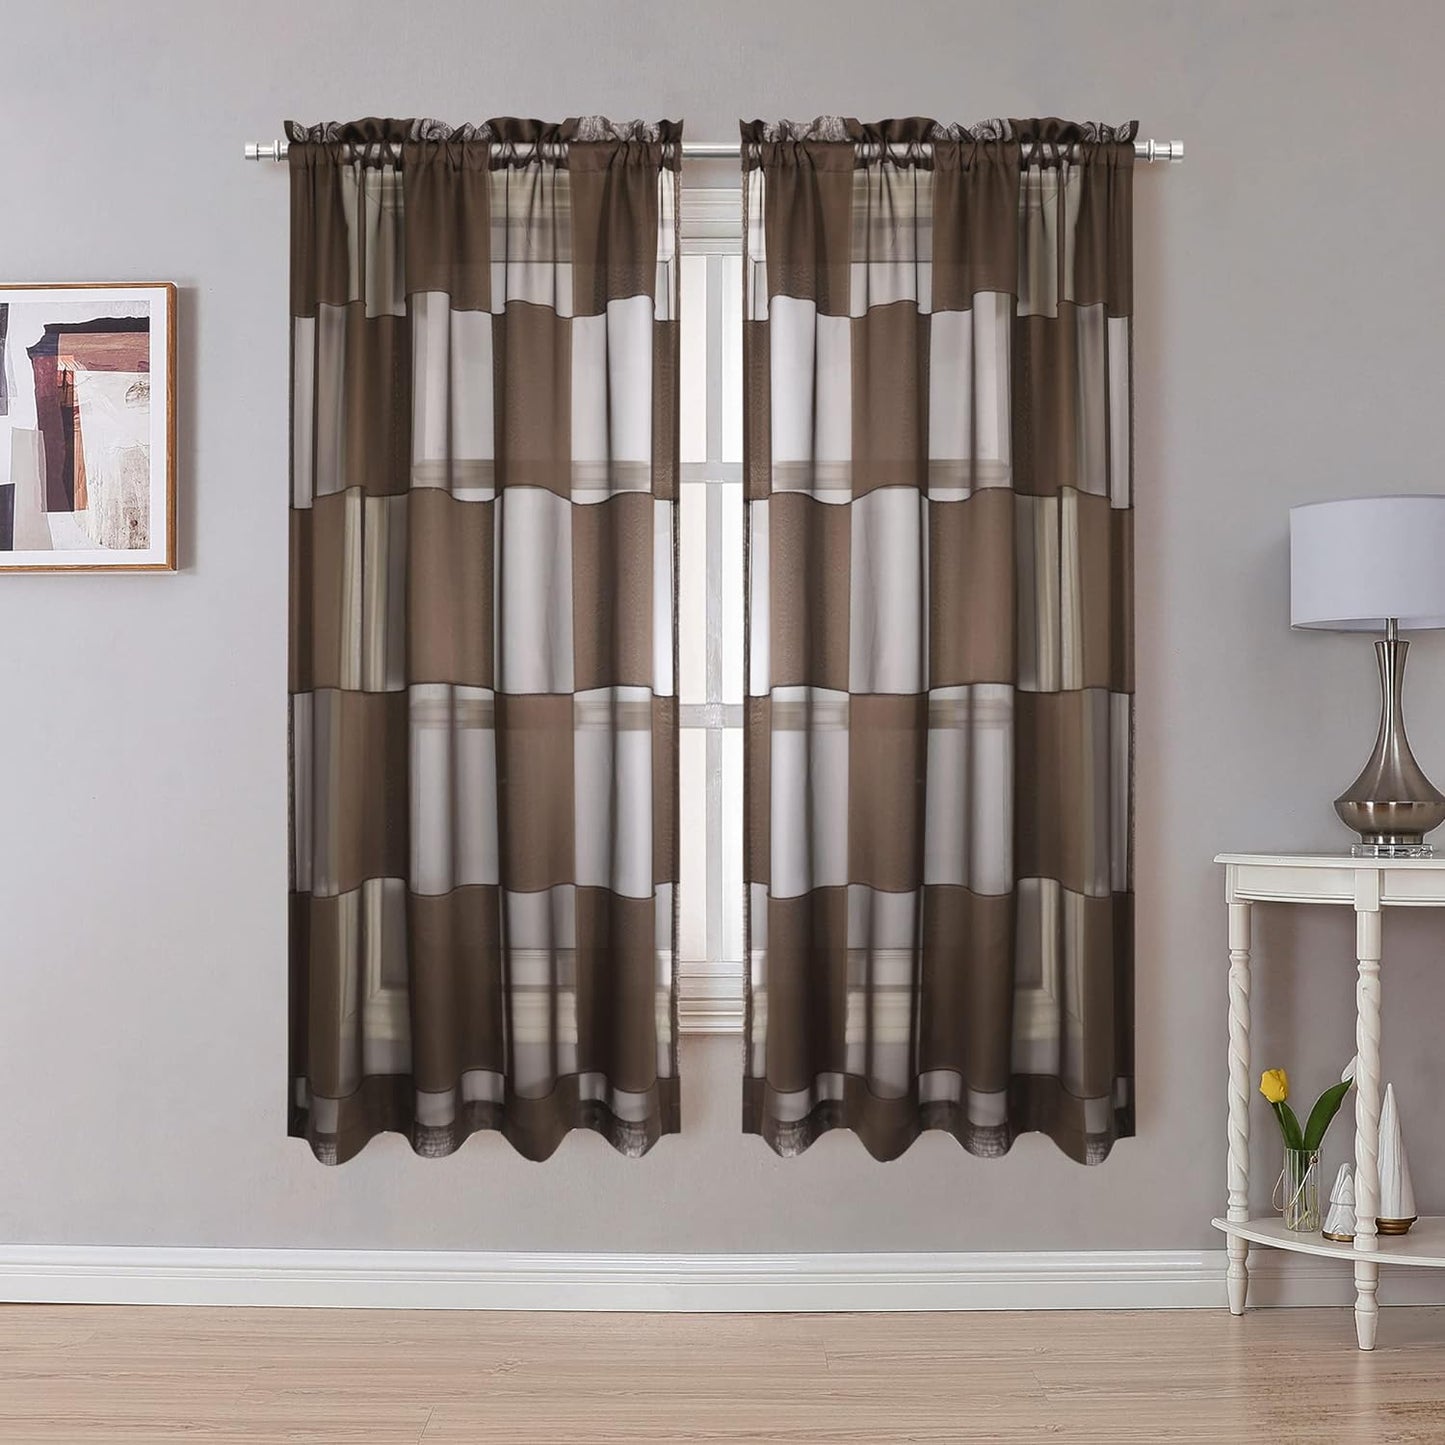 OVZME Sage Green Sheer Bedroom Curtains 84 Inch Length 2 Panels Set, Dual Rod Pocket Clip Checkered Window Curtains for Living Room, Light Filtering & Privacy Sheer Green Drapes, Each 42W X 84L  OVZME Brown 42W X 63L 